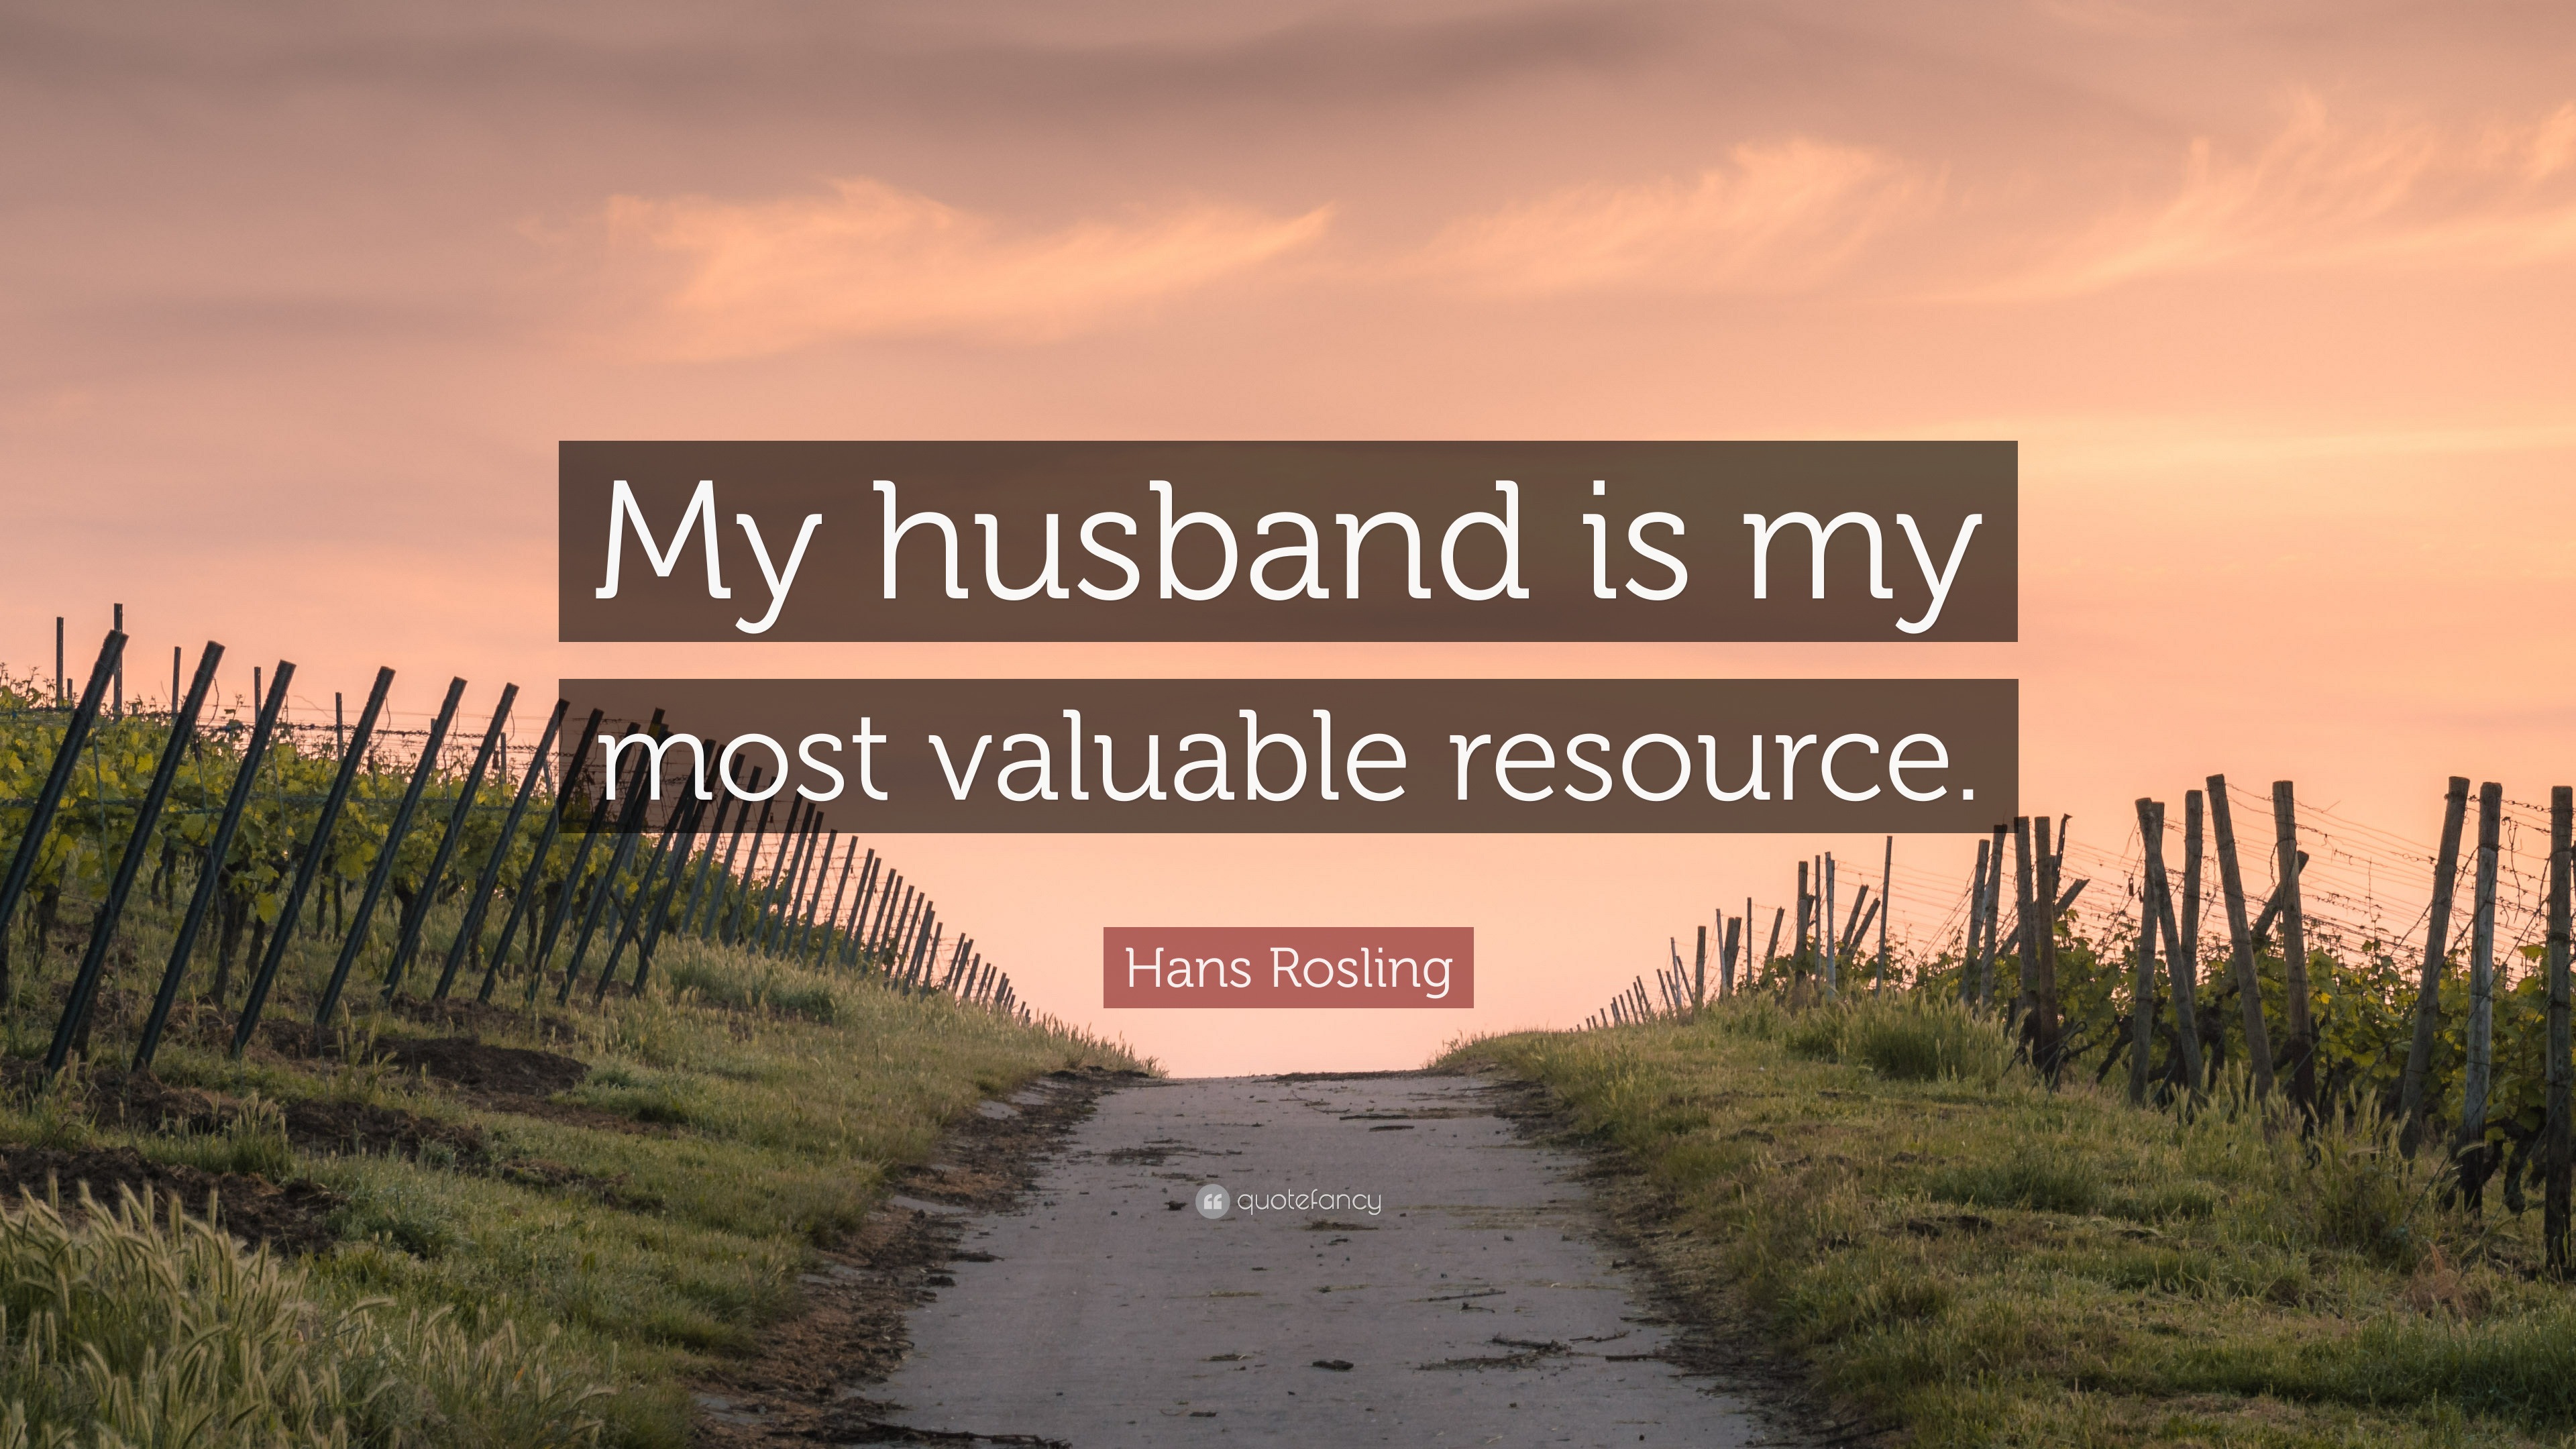 Hans Rosling Quote: "My husband is my most valuable ...